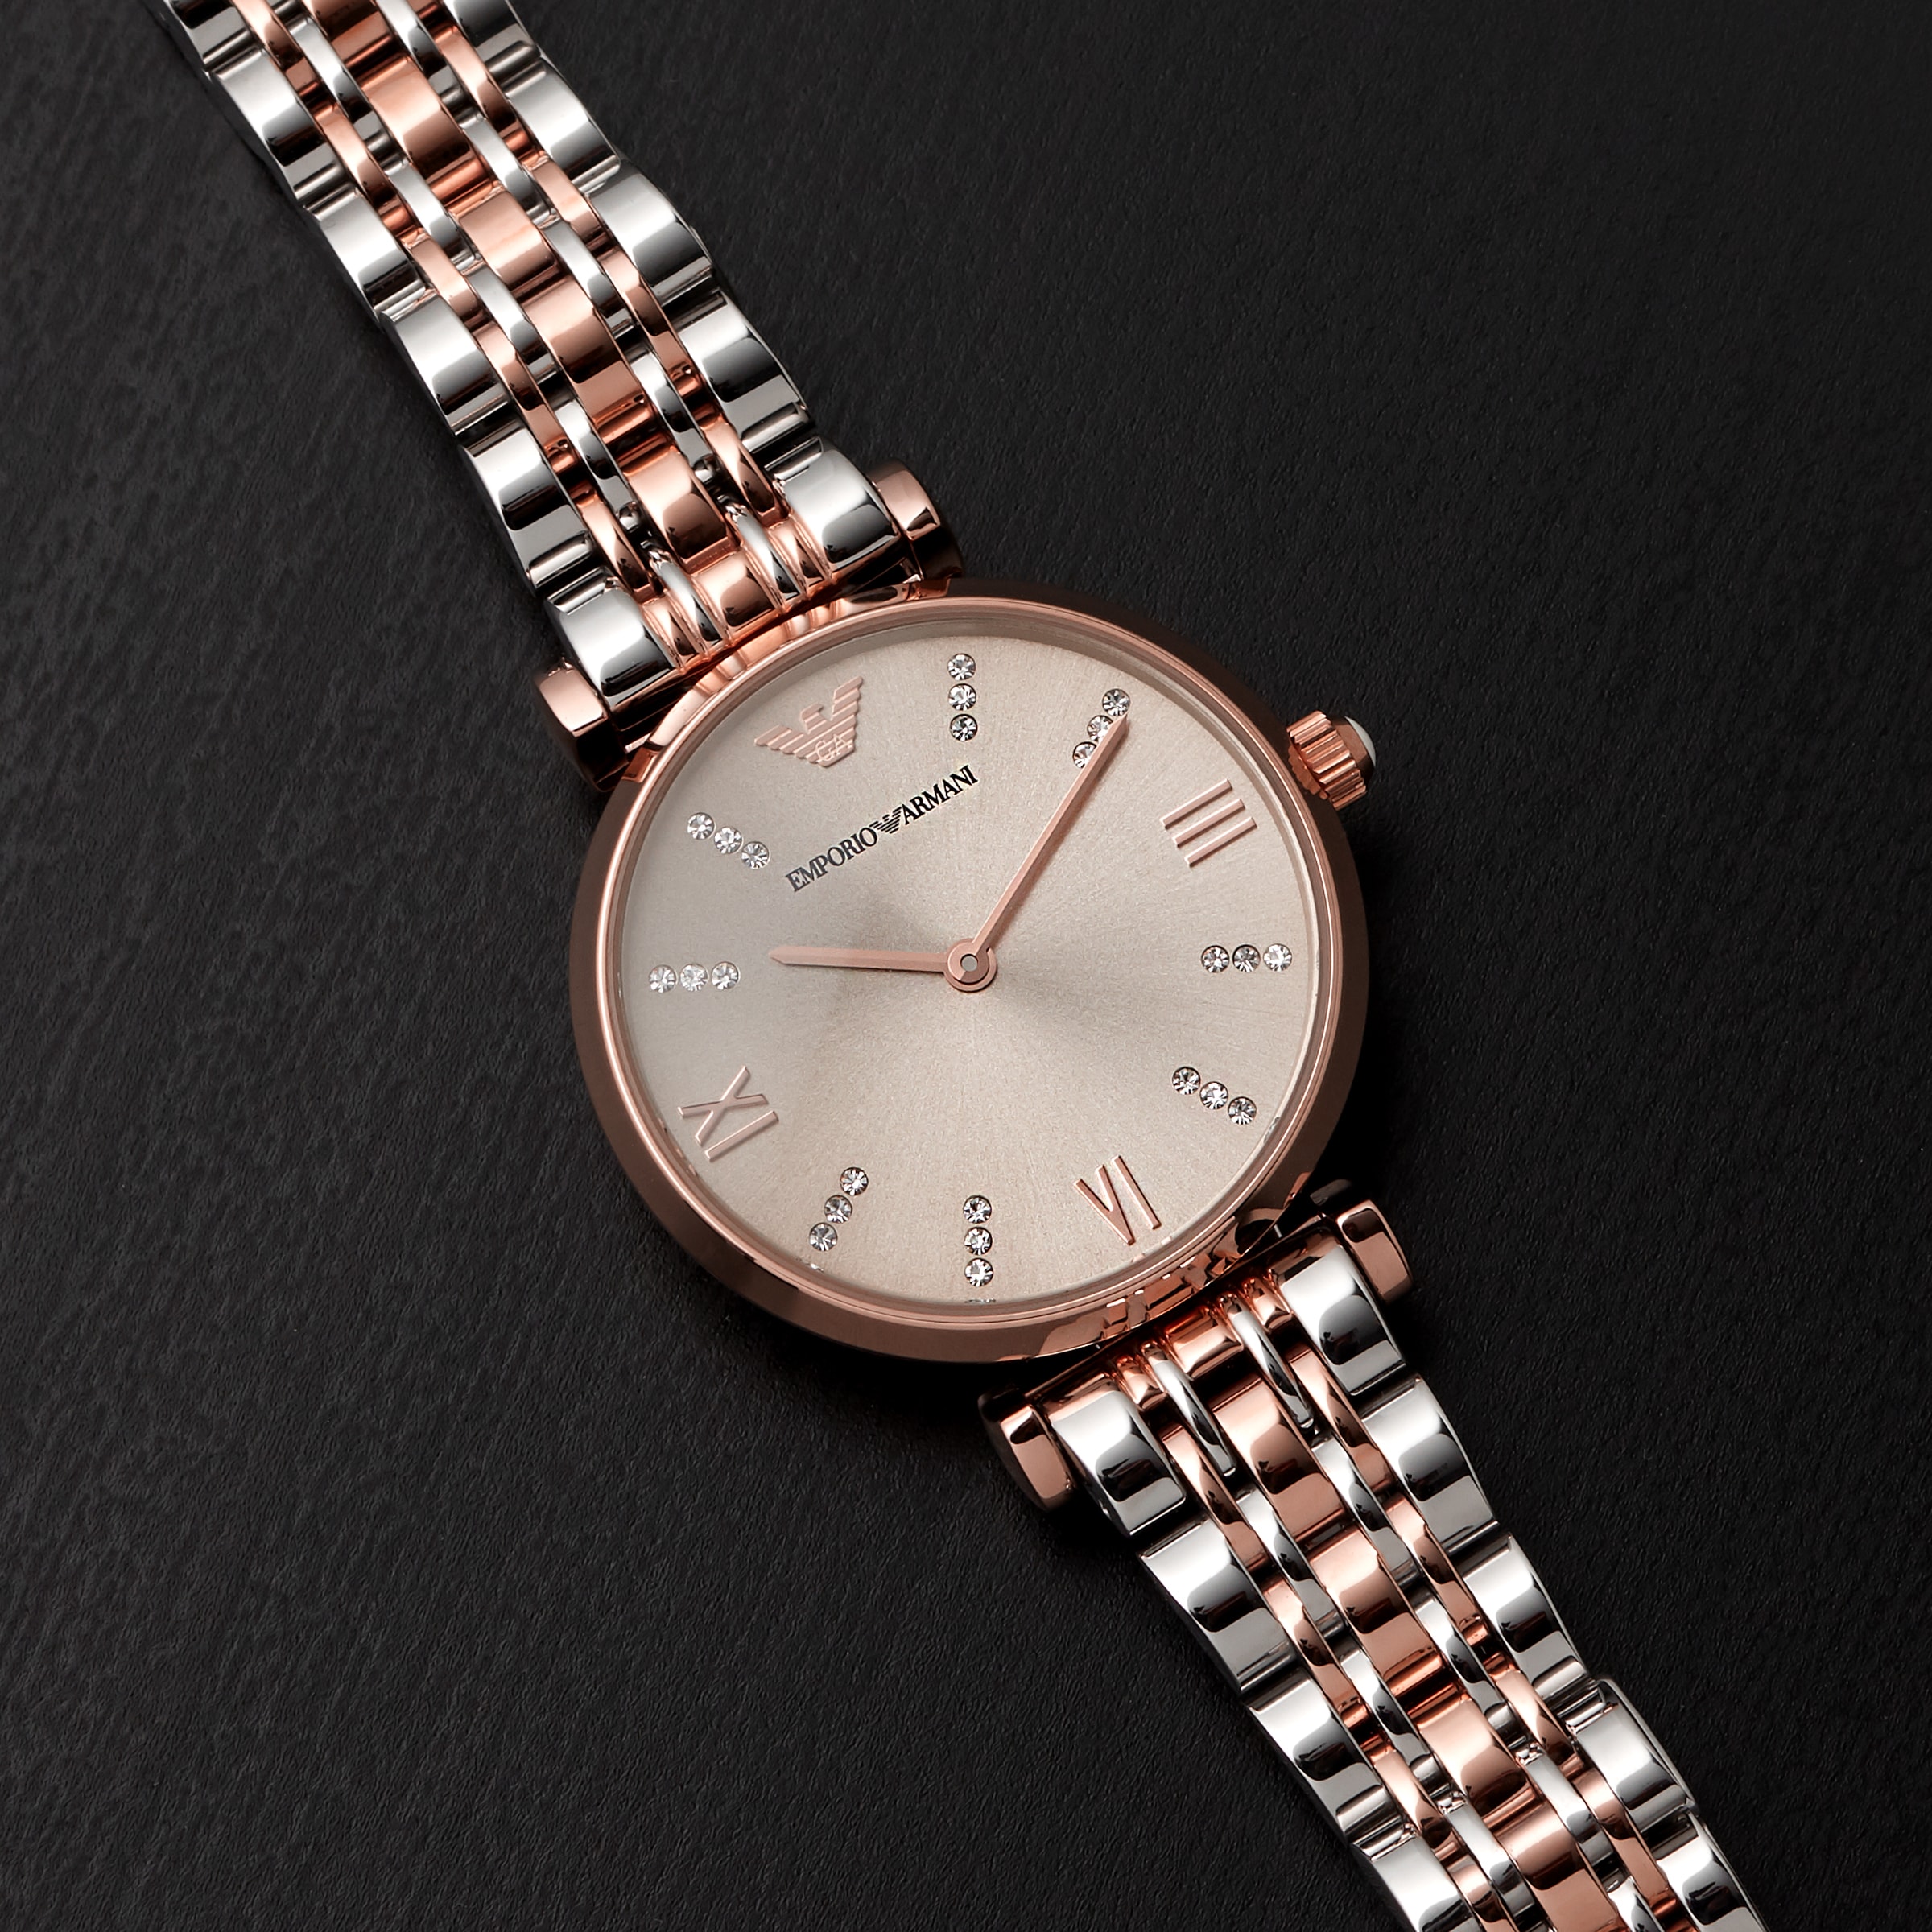 Luxury Designer Womens Olivia Burton Watches AR1840 SKMEI Lady Olivia  Burton Watches With Logo, High Quality Superaa, Iced Out Miner, Box  Included From Lesarastore3, $151.27 | DHgate.Com